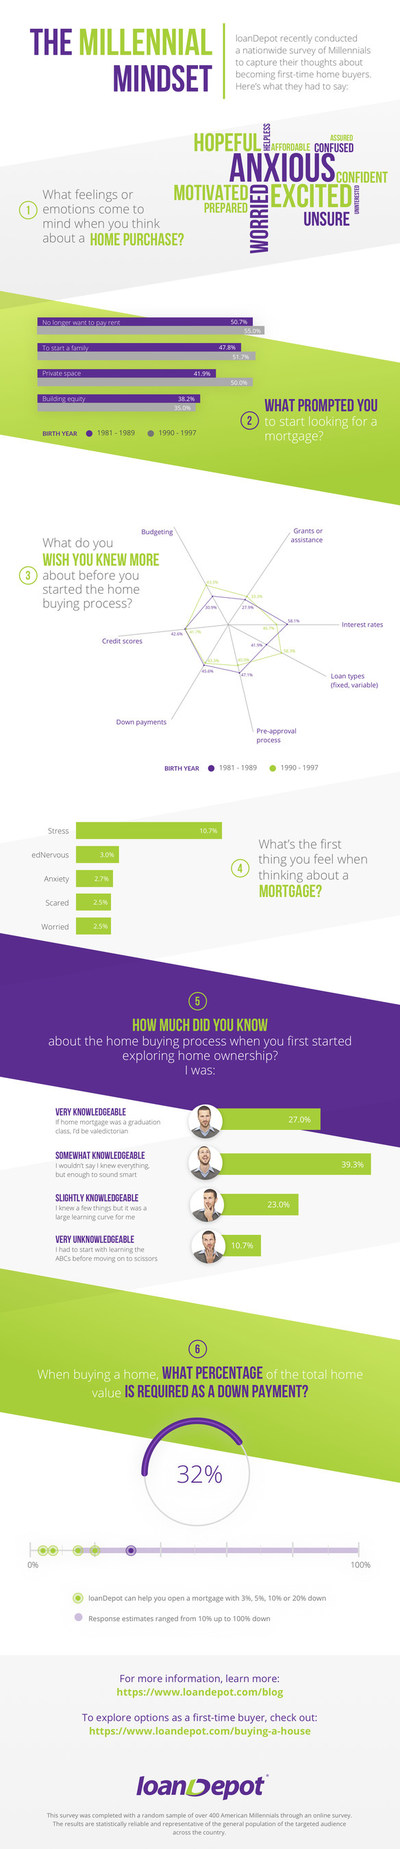 Infographic -- Latest national survey from loanDepot shows what Millennials think about the home buying process.